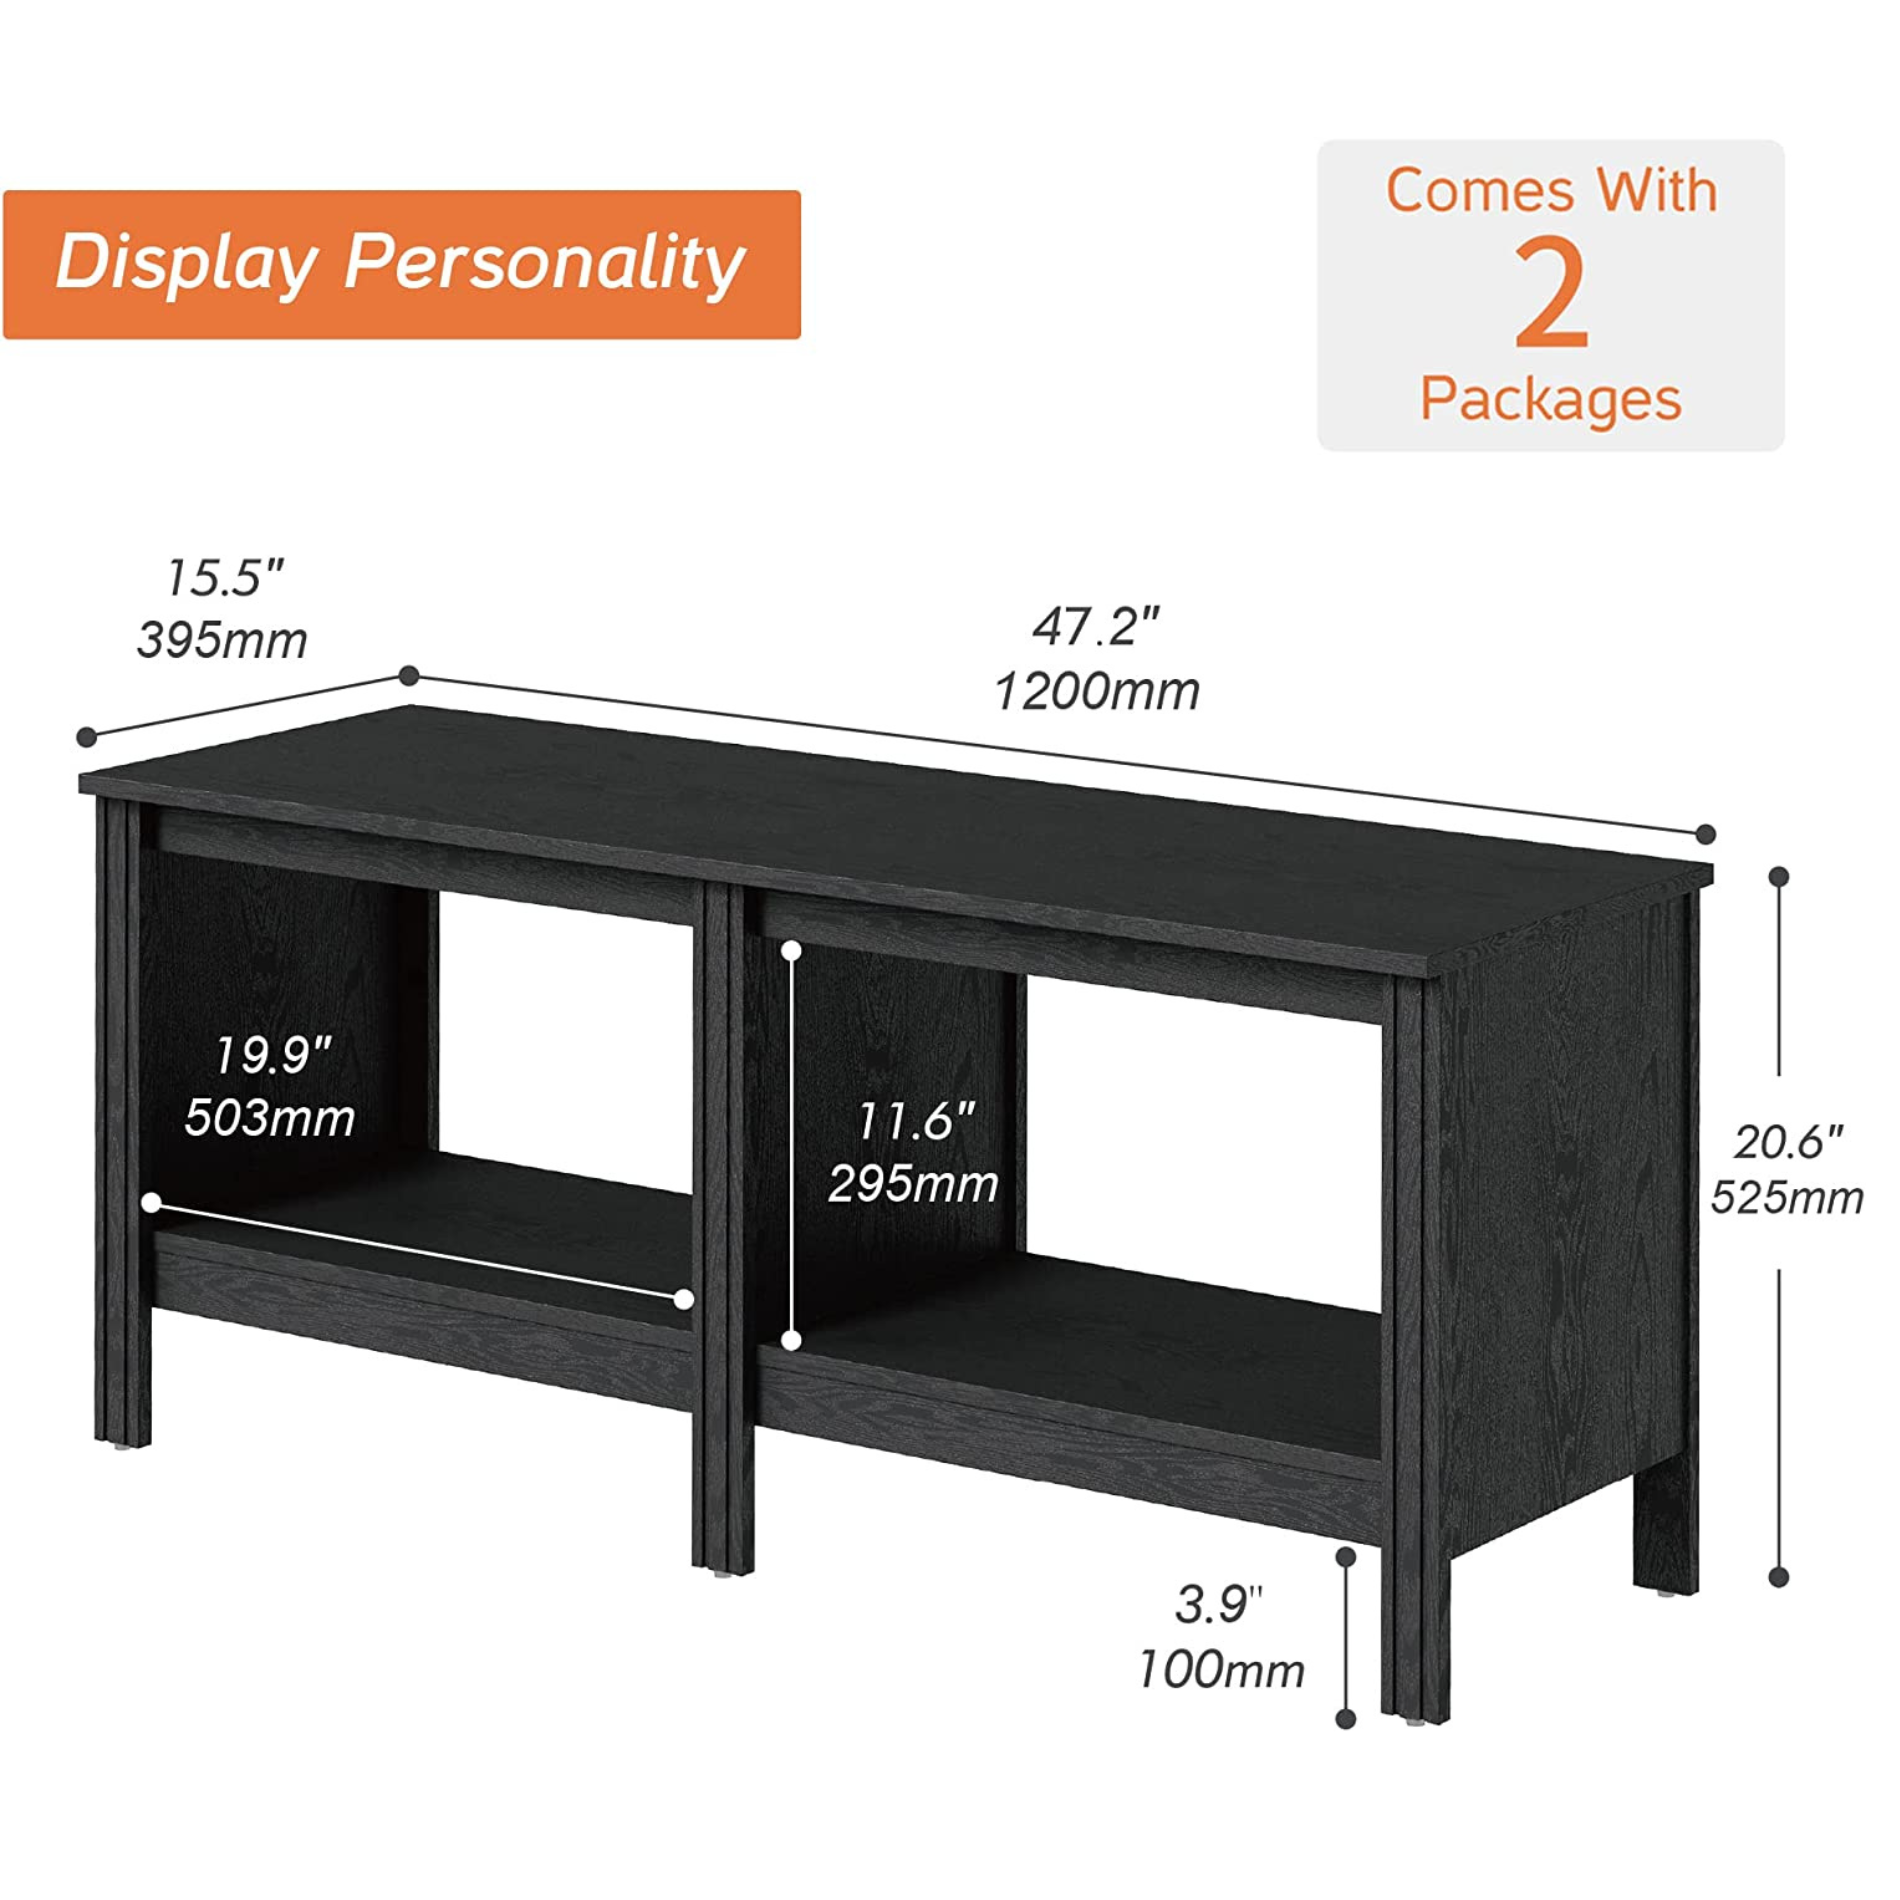 WAMPAT 47.2" Classic TV Stand for 55 Inch TV Entertainment Center, Wood TV Console Media Table with 2 Cubby Storage for Living Room Bedroom, Black